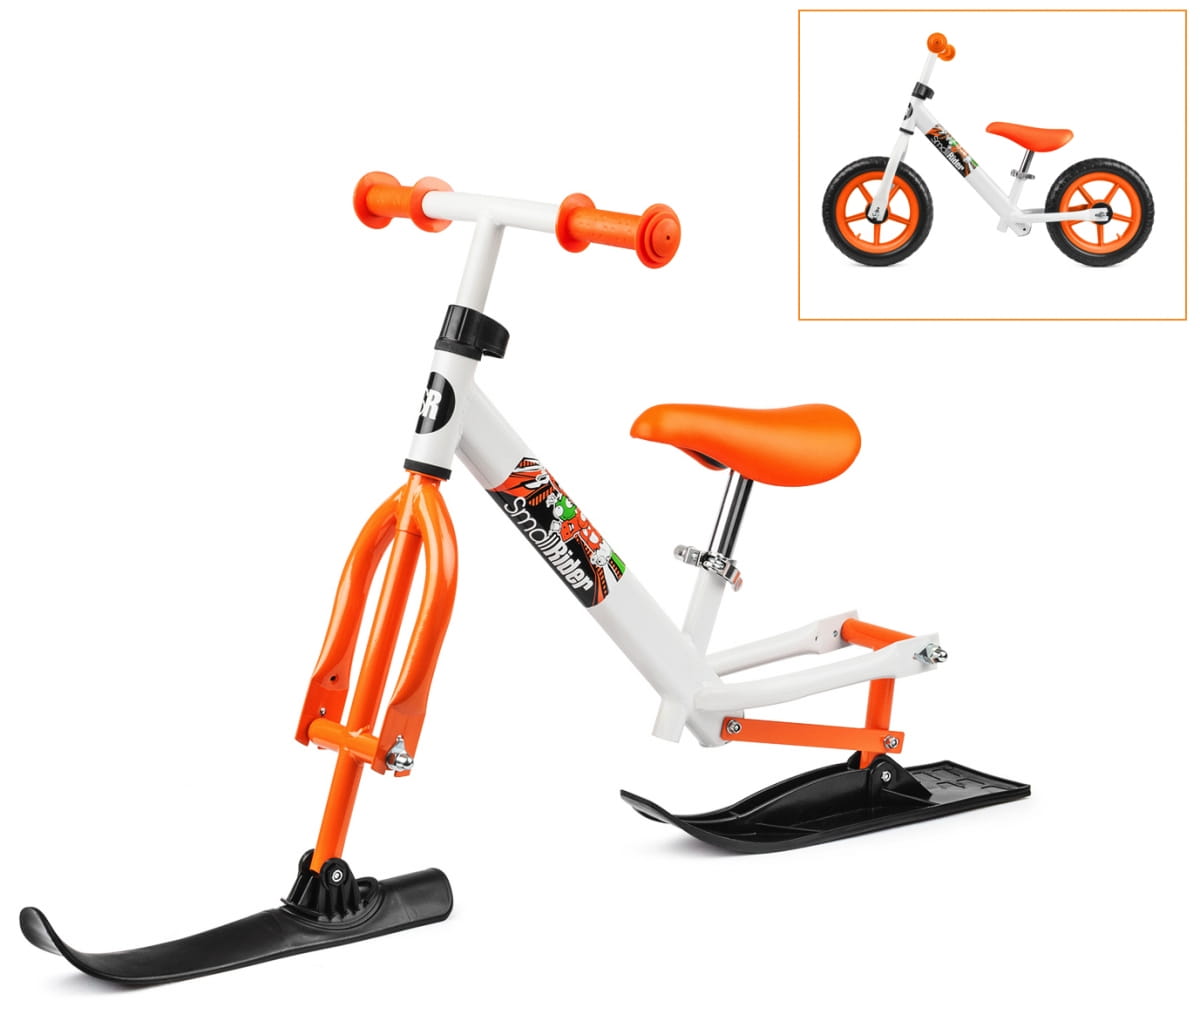   Small Rider Combo Racer     - -